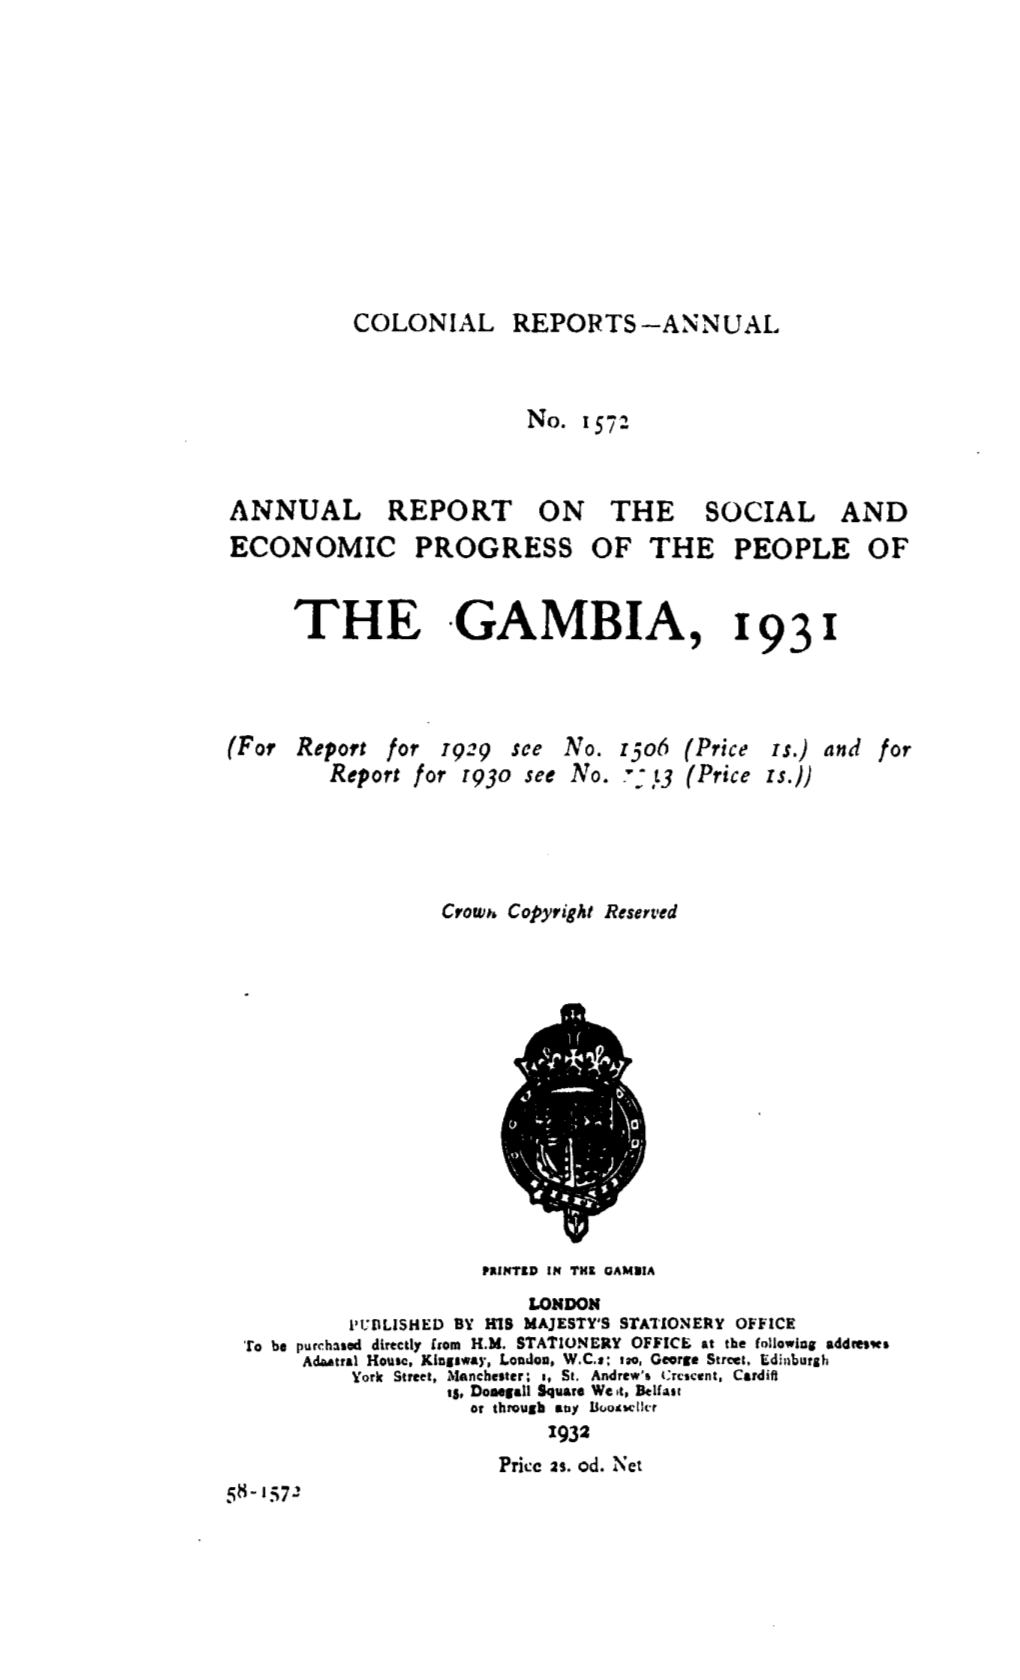 Annual Report of the Colonies. Gambia 1931